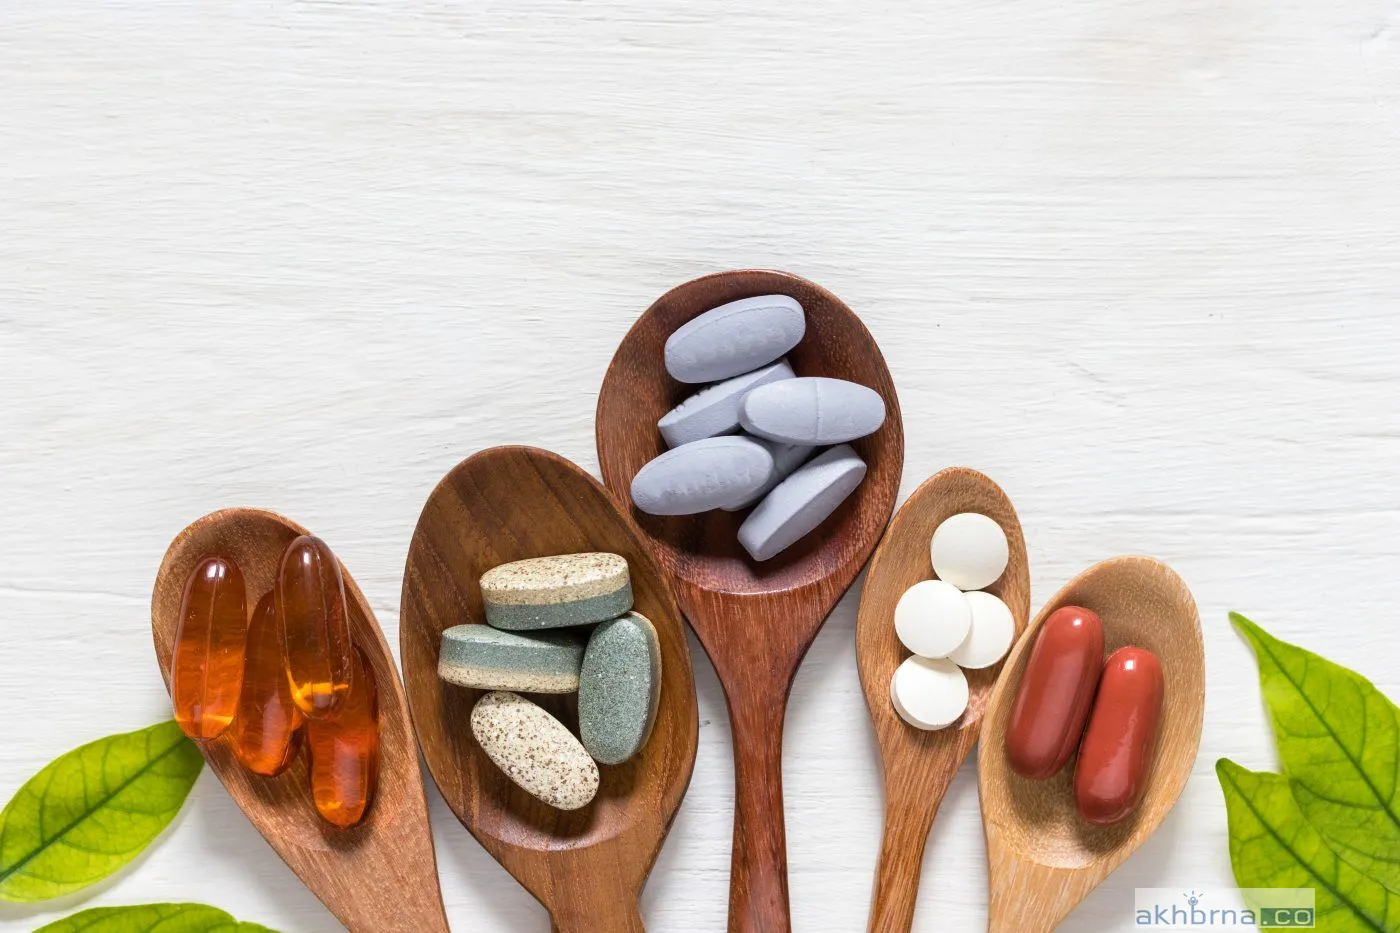 The UAE announces New conditions for the sale of nutritional supplements and painkillers